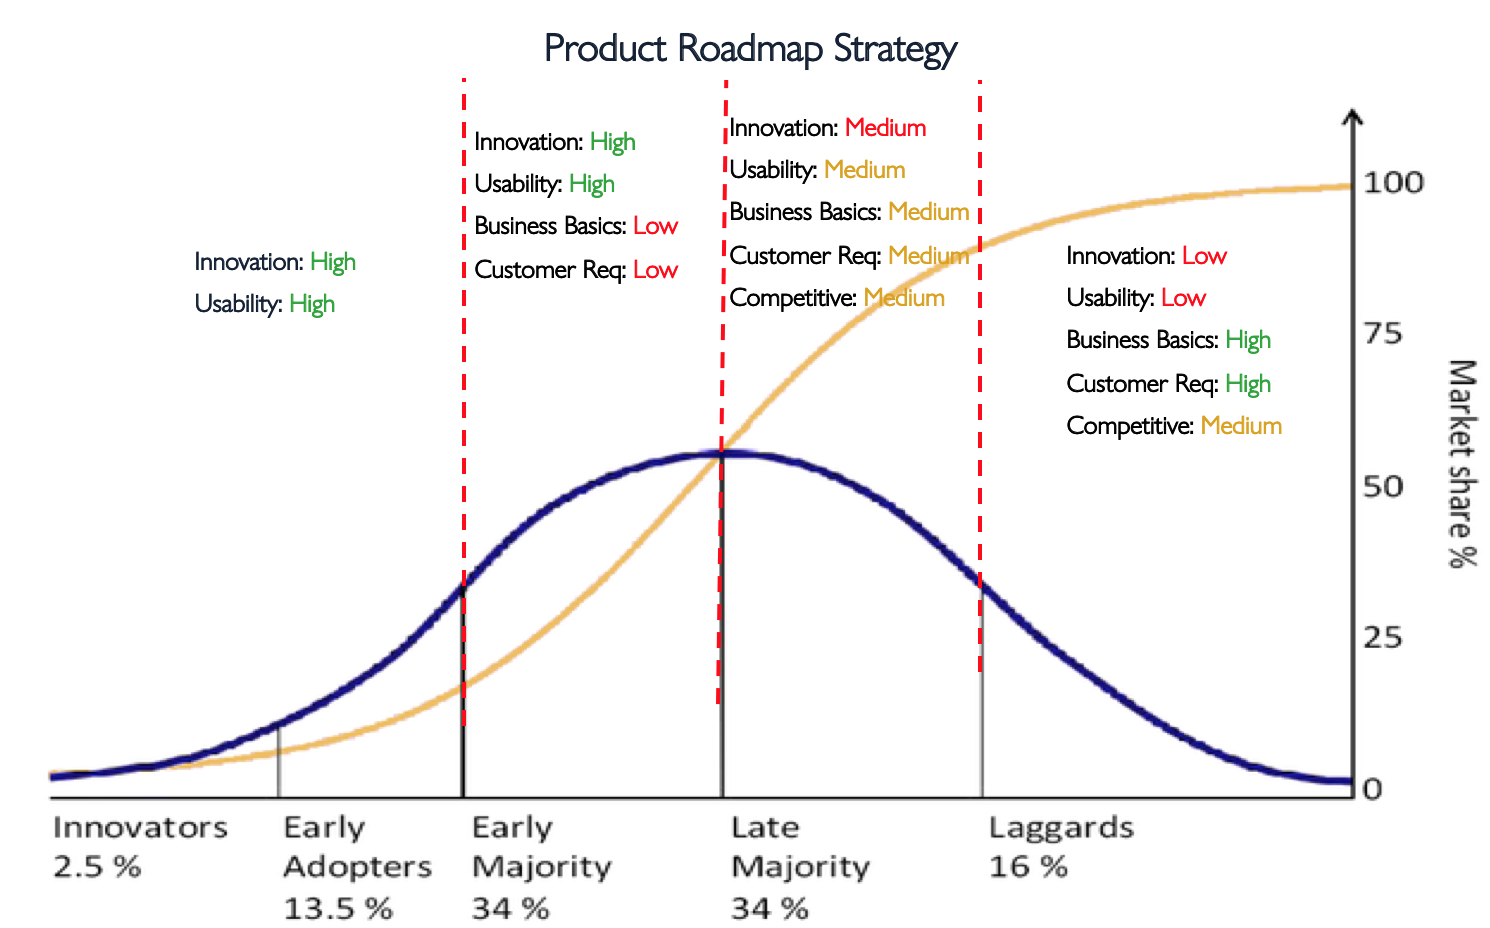 Product Roadmap Strategy and the Product Adoption Curve